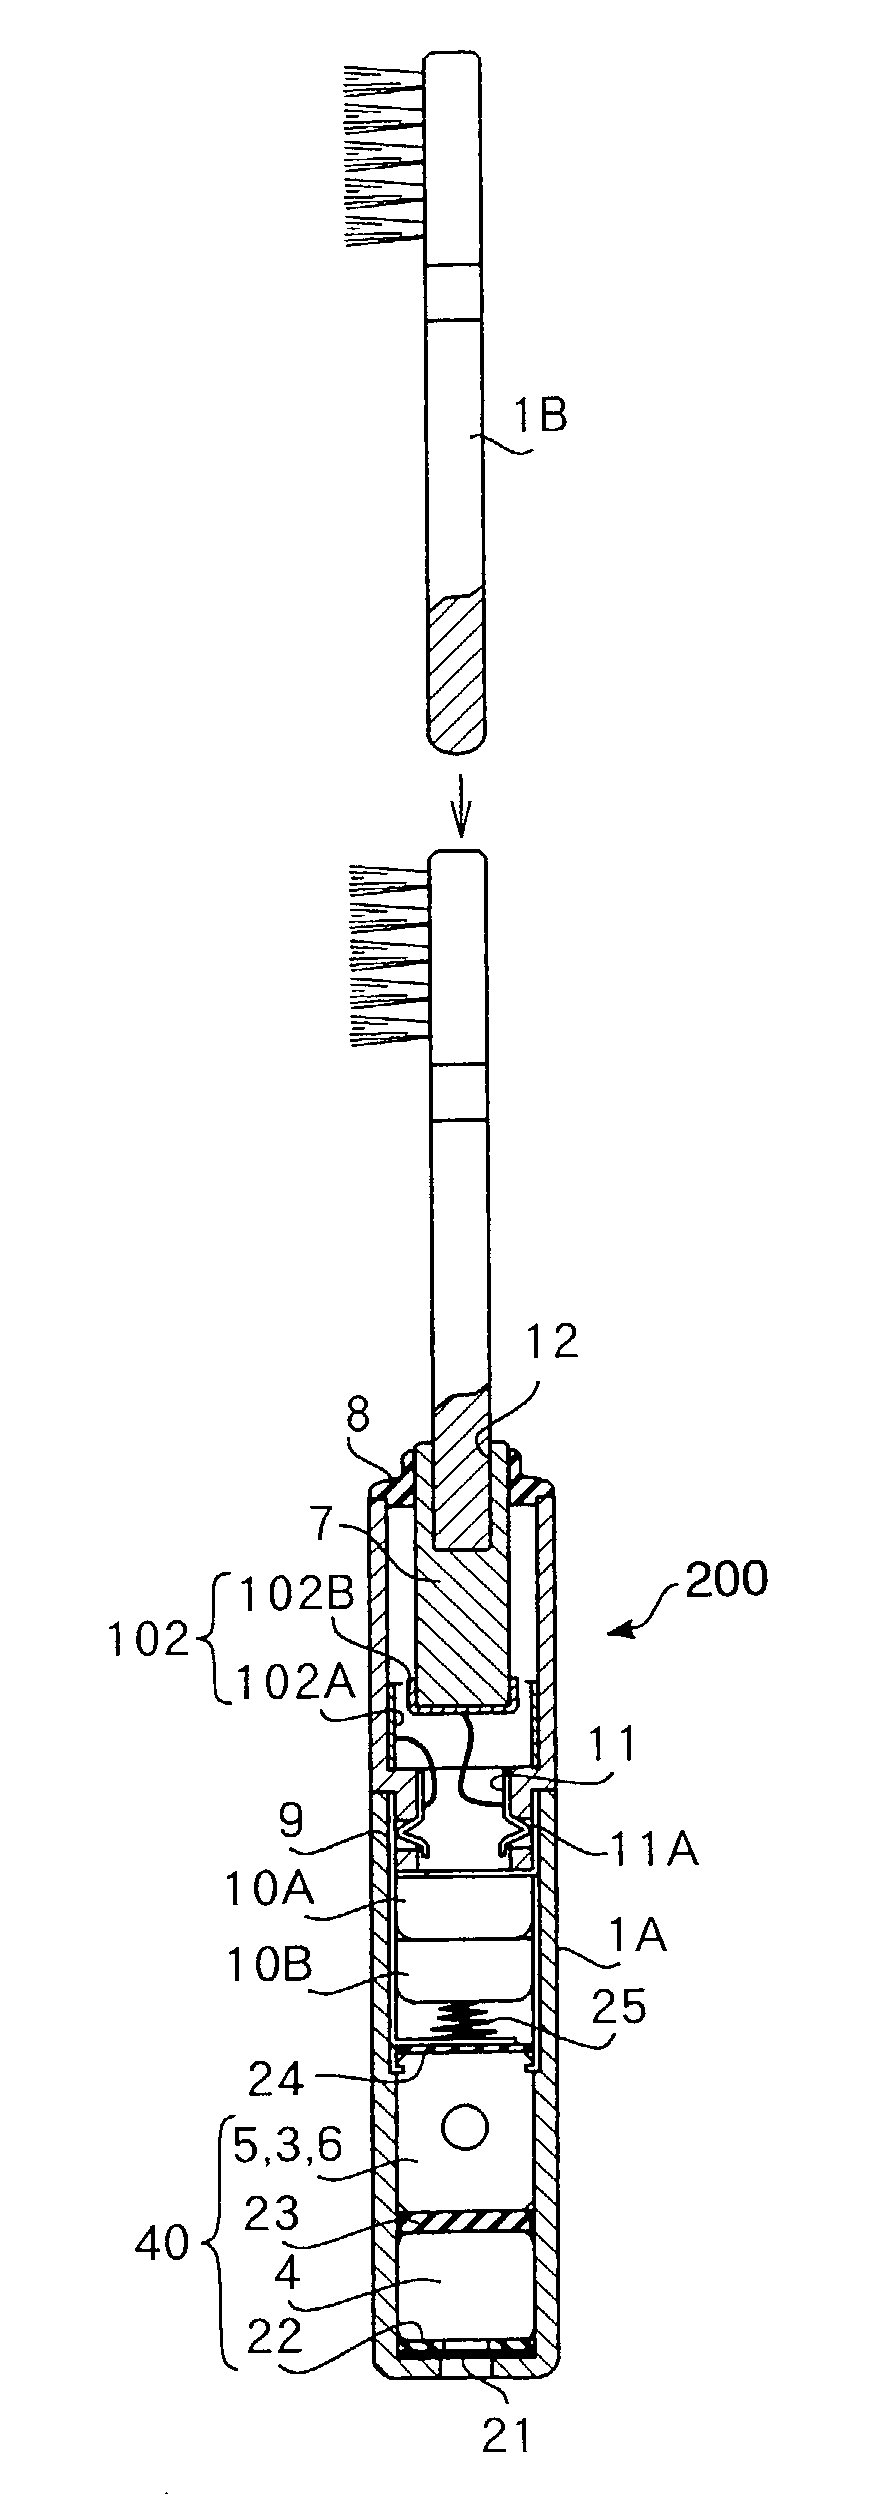 Toothbrush assembly with sound generating function